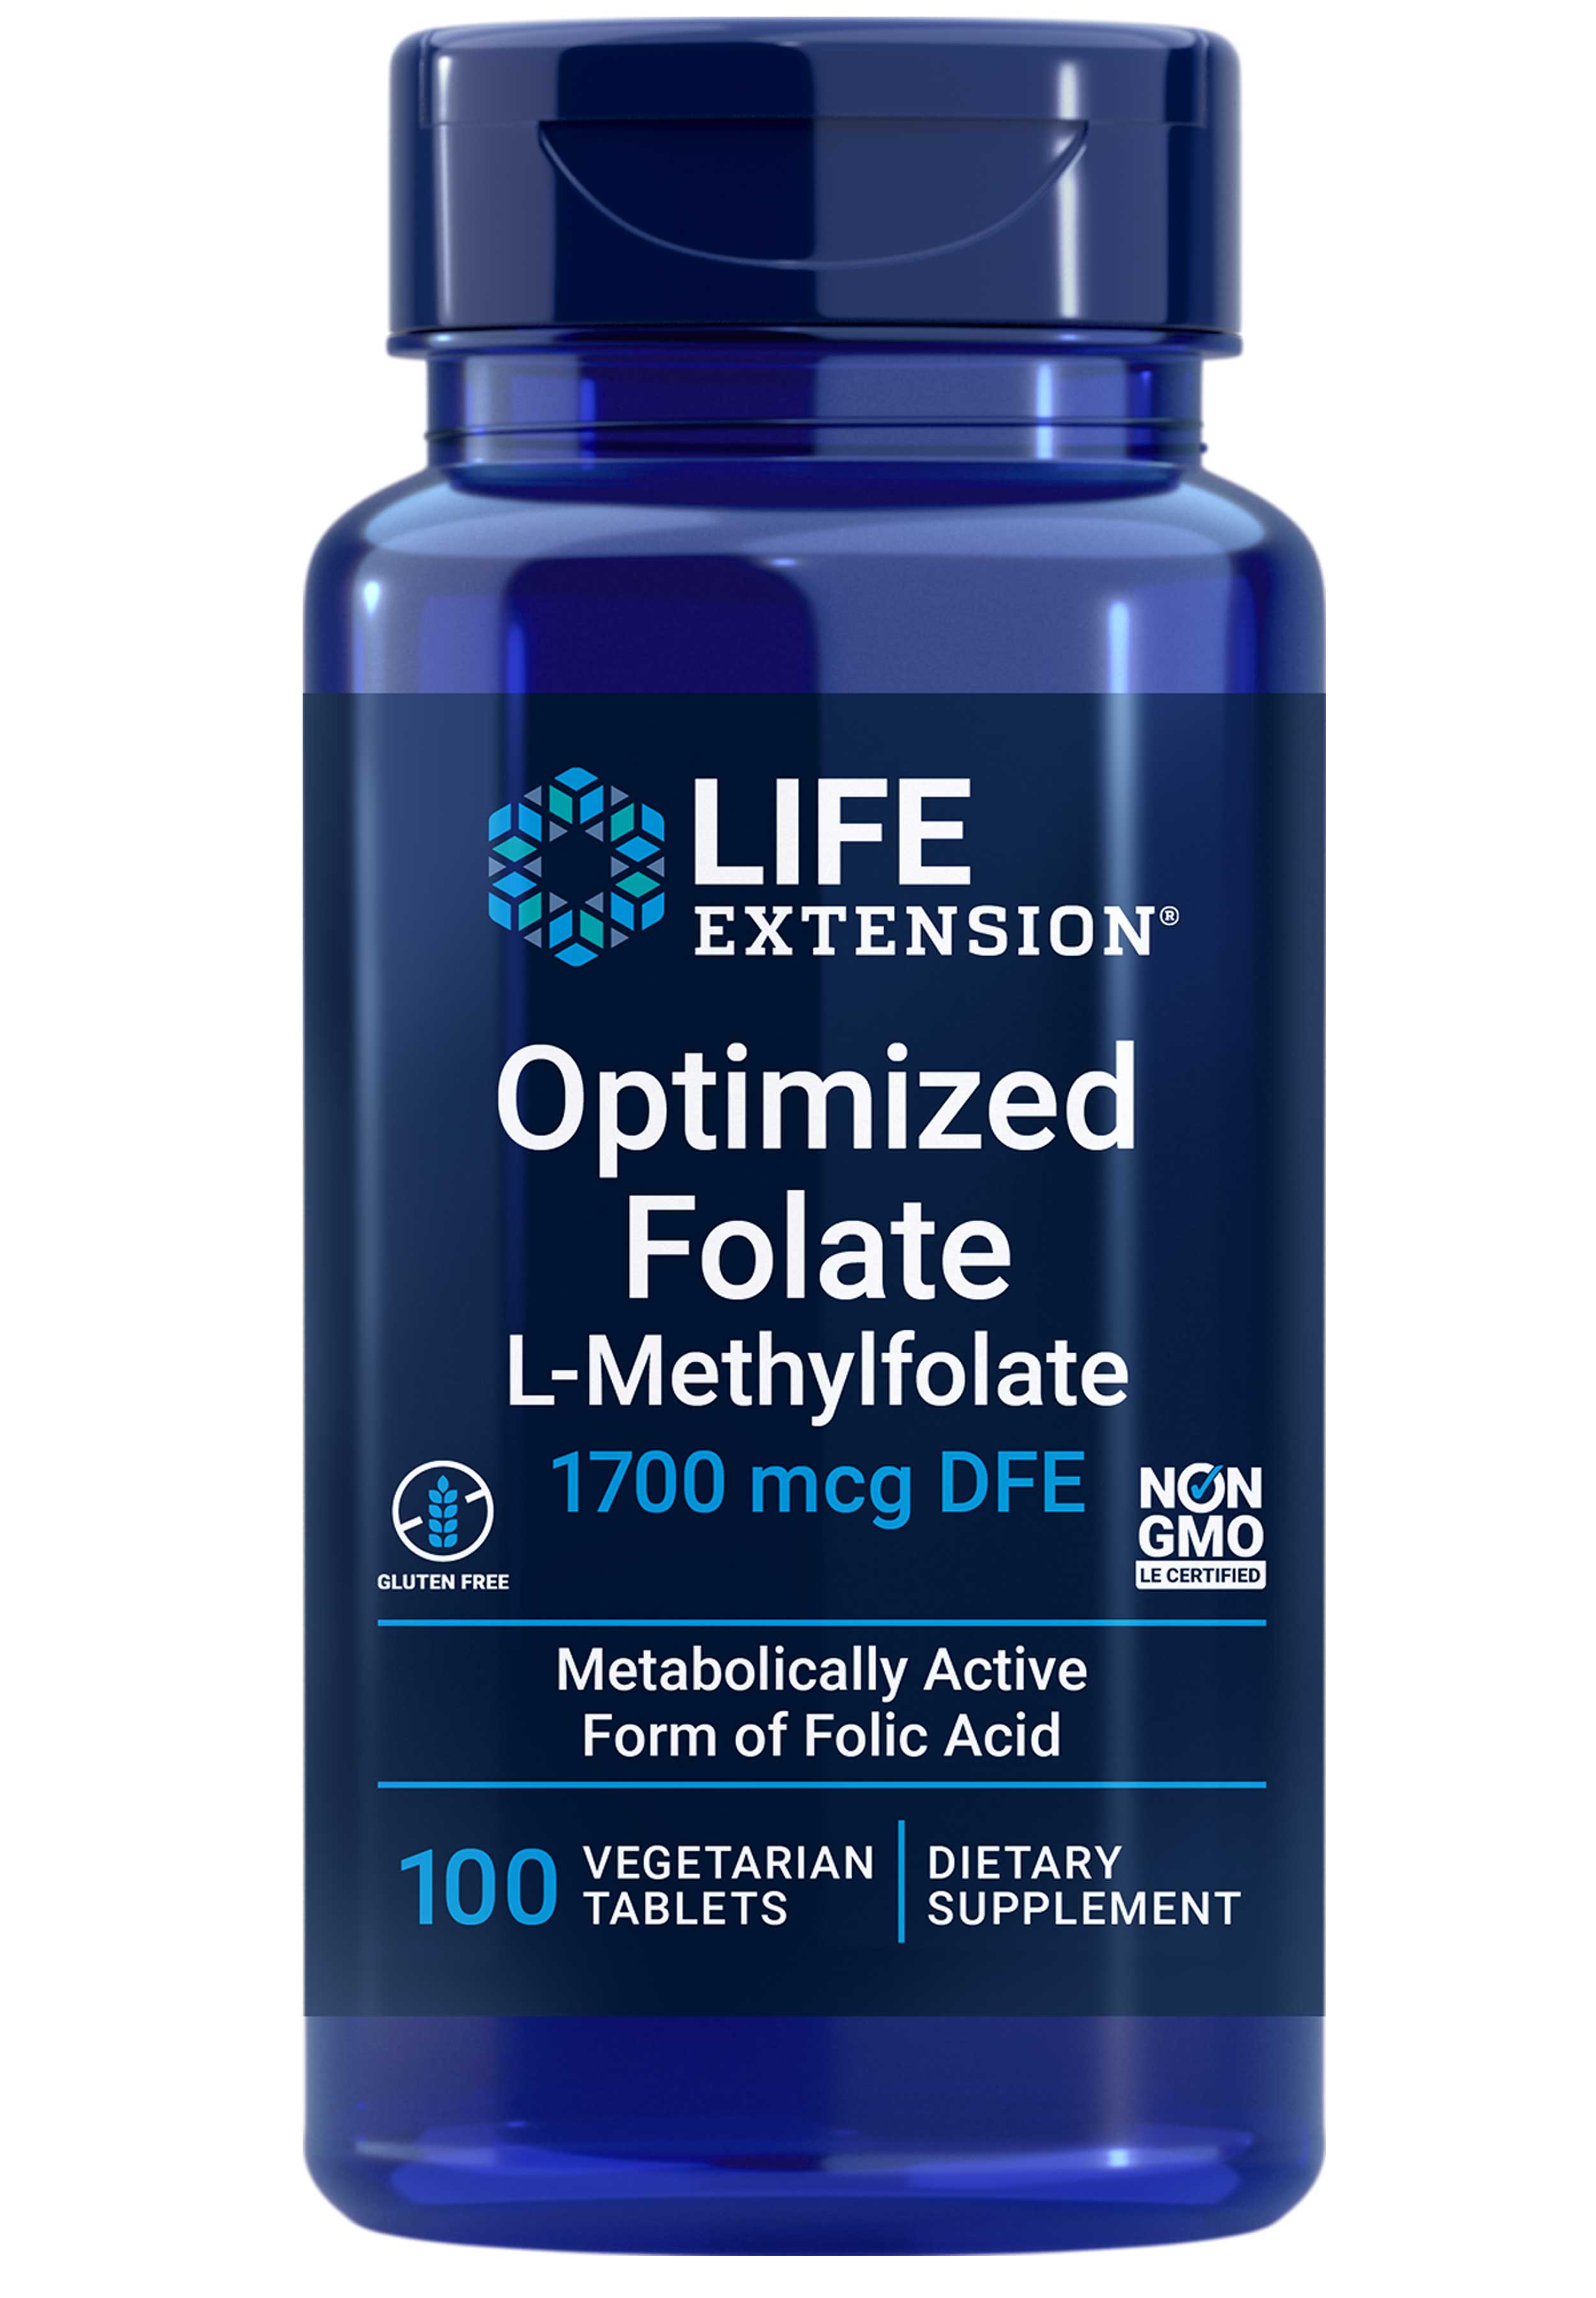 Life Extension Optimized Folate L-Methylfolate